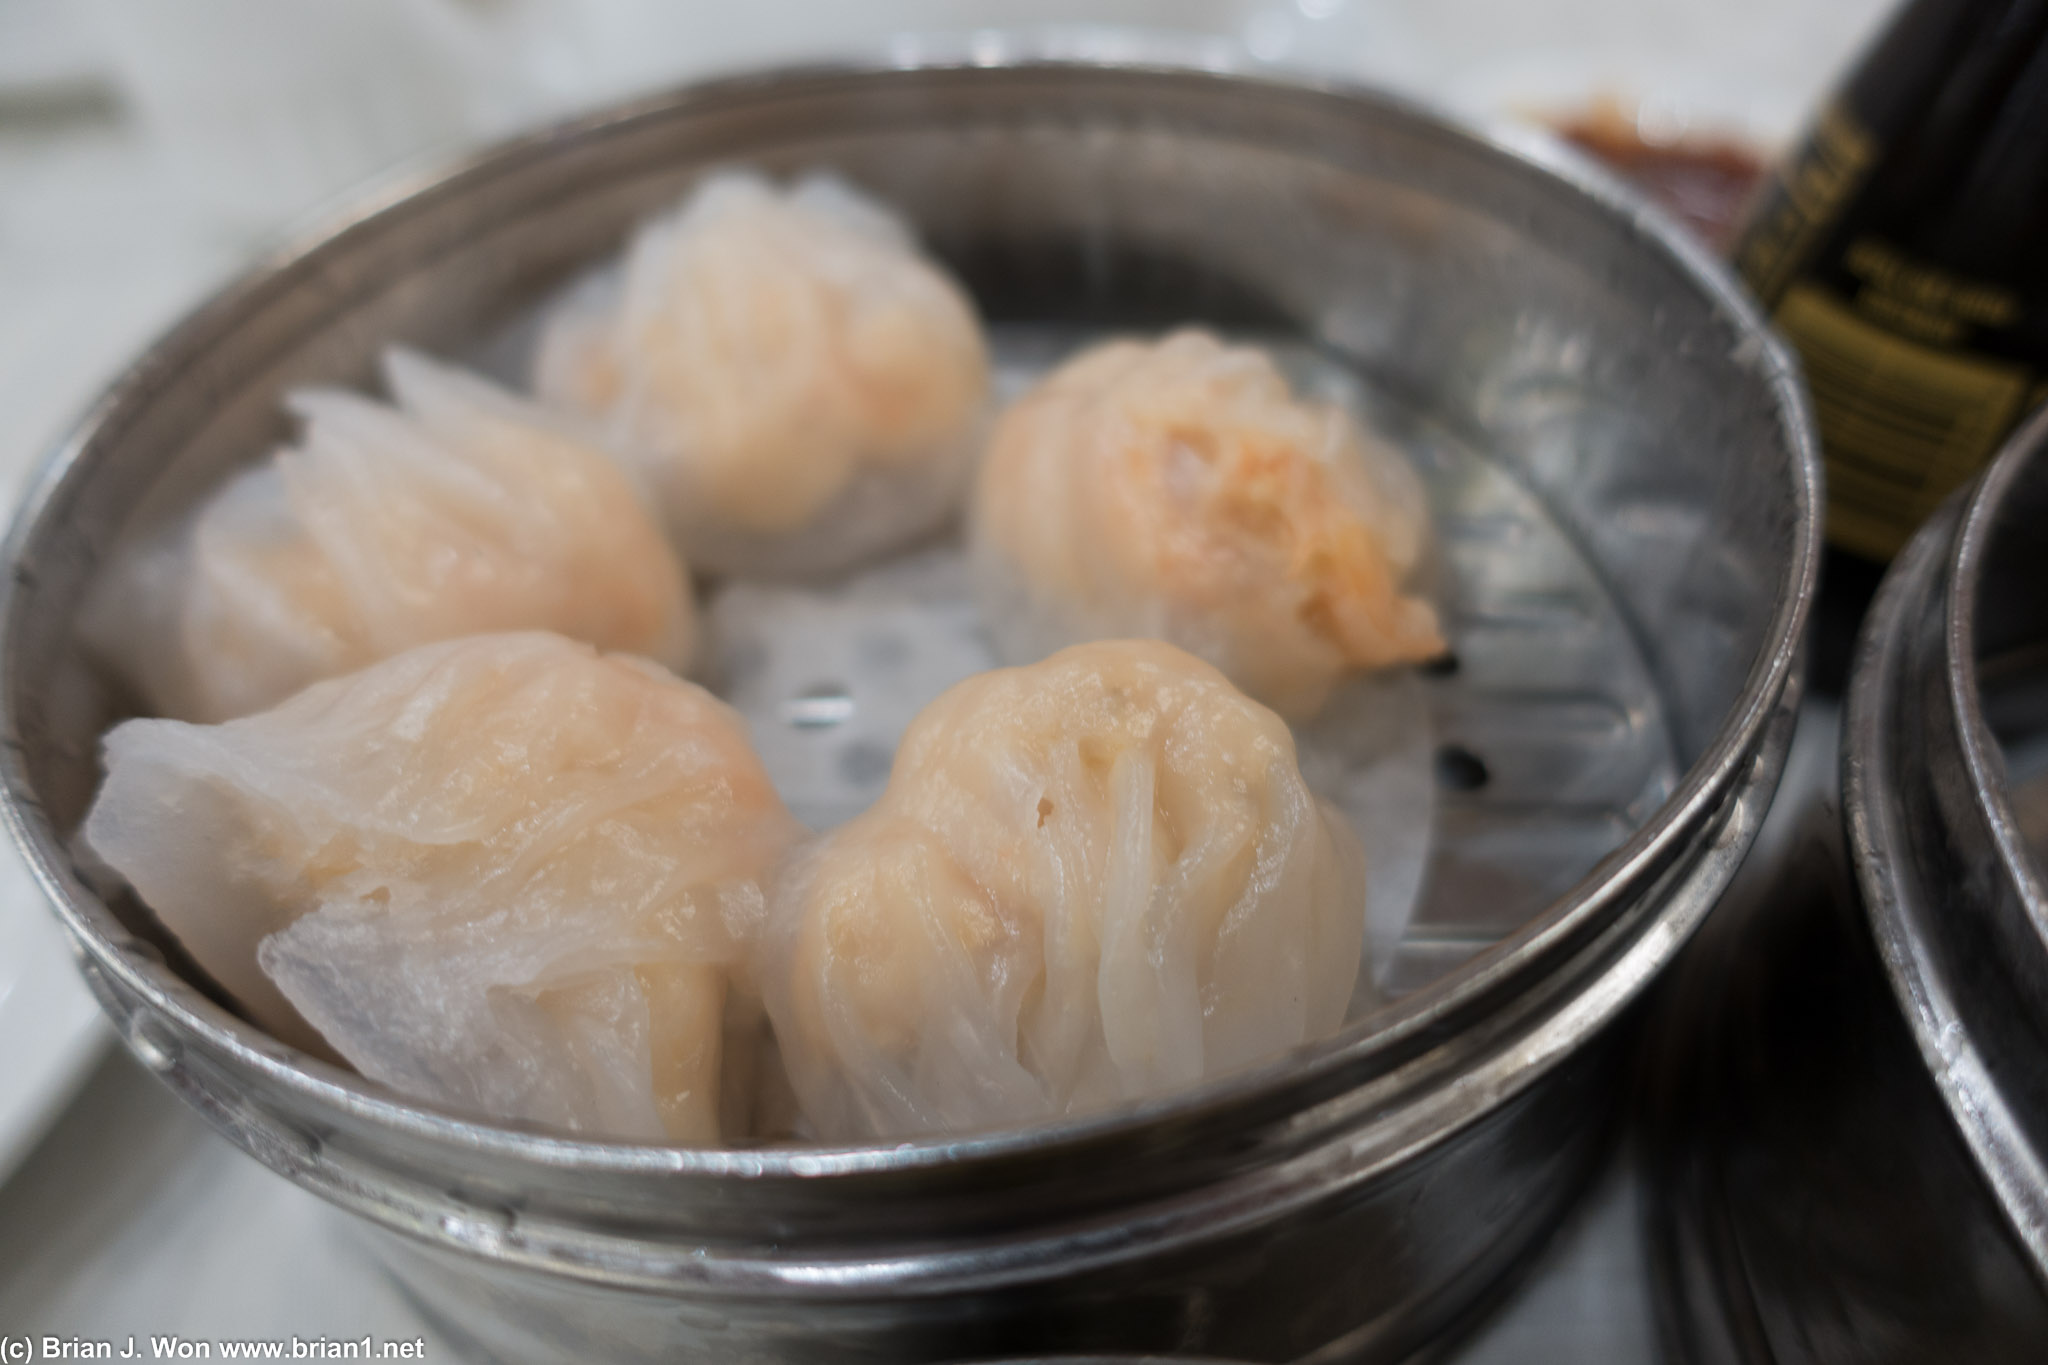 Some very over-steamed har gow.